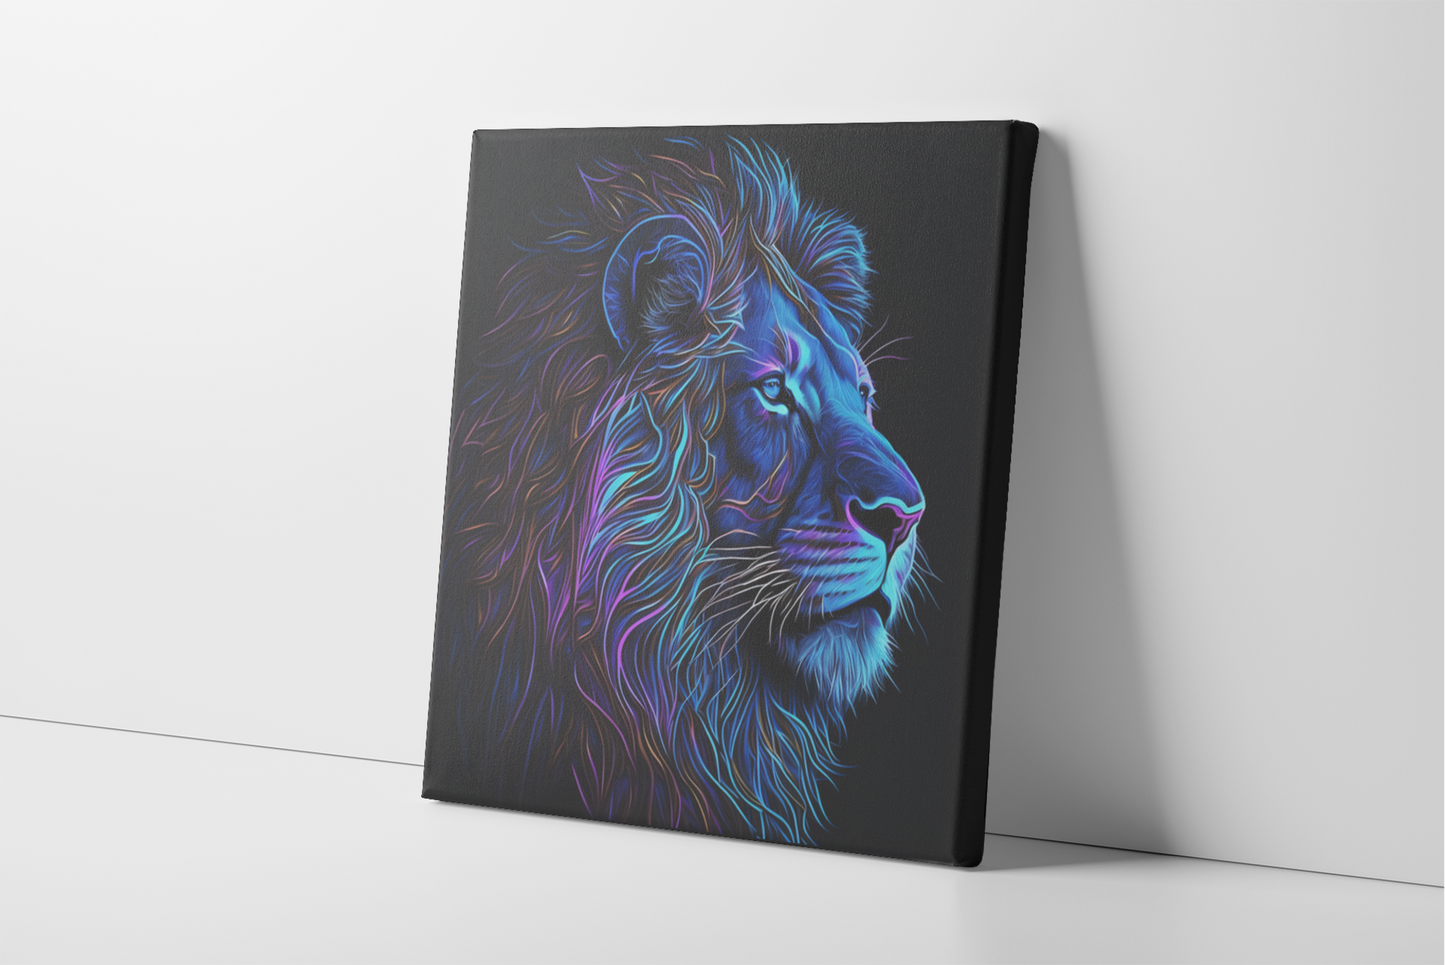 Black Light Lion Canvas Wall Art, Neon Lion Canvas Painting, Glowing Lion Painting on Black Background, Colorful Lion Canvas